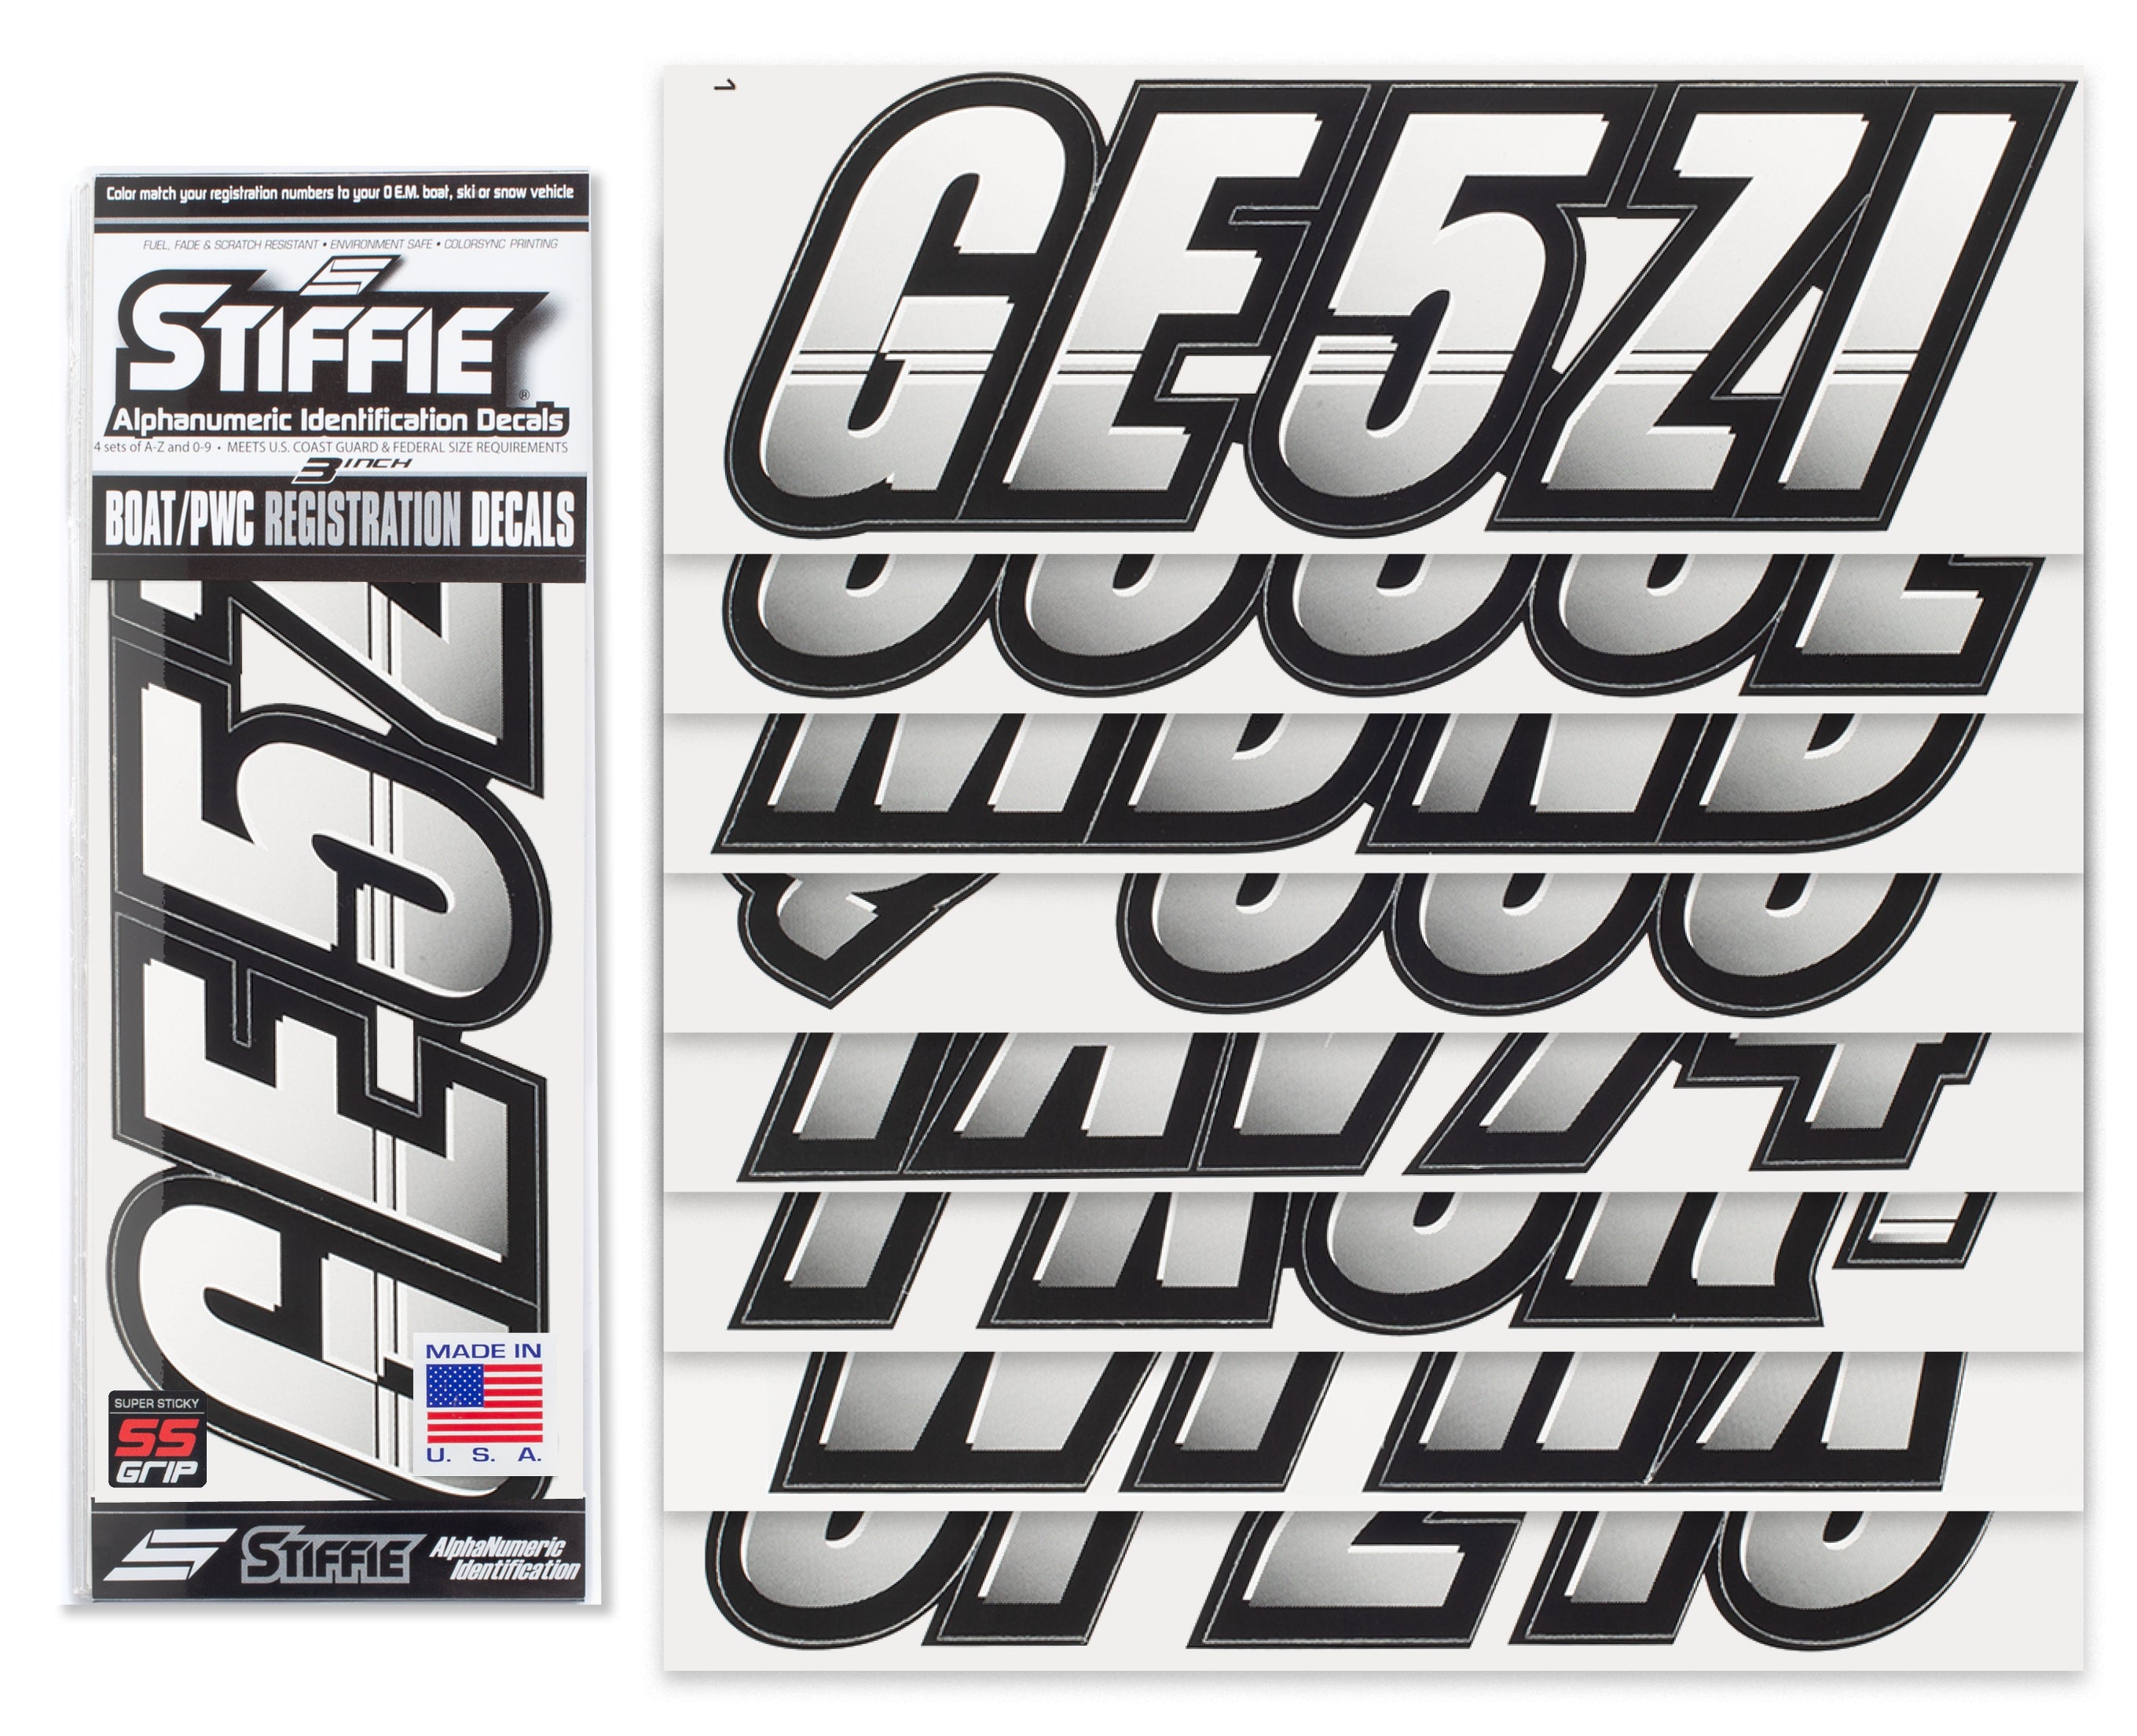 Techtron White/Black Super Sticky 3" Alpha Numeric Registration Identification Numbers Stickers Decals for Sea-Doo Spark, Inflatable Boats, Ribs, Hypalon/PVC, PWC and Boats.